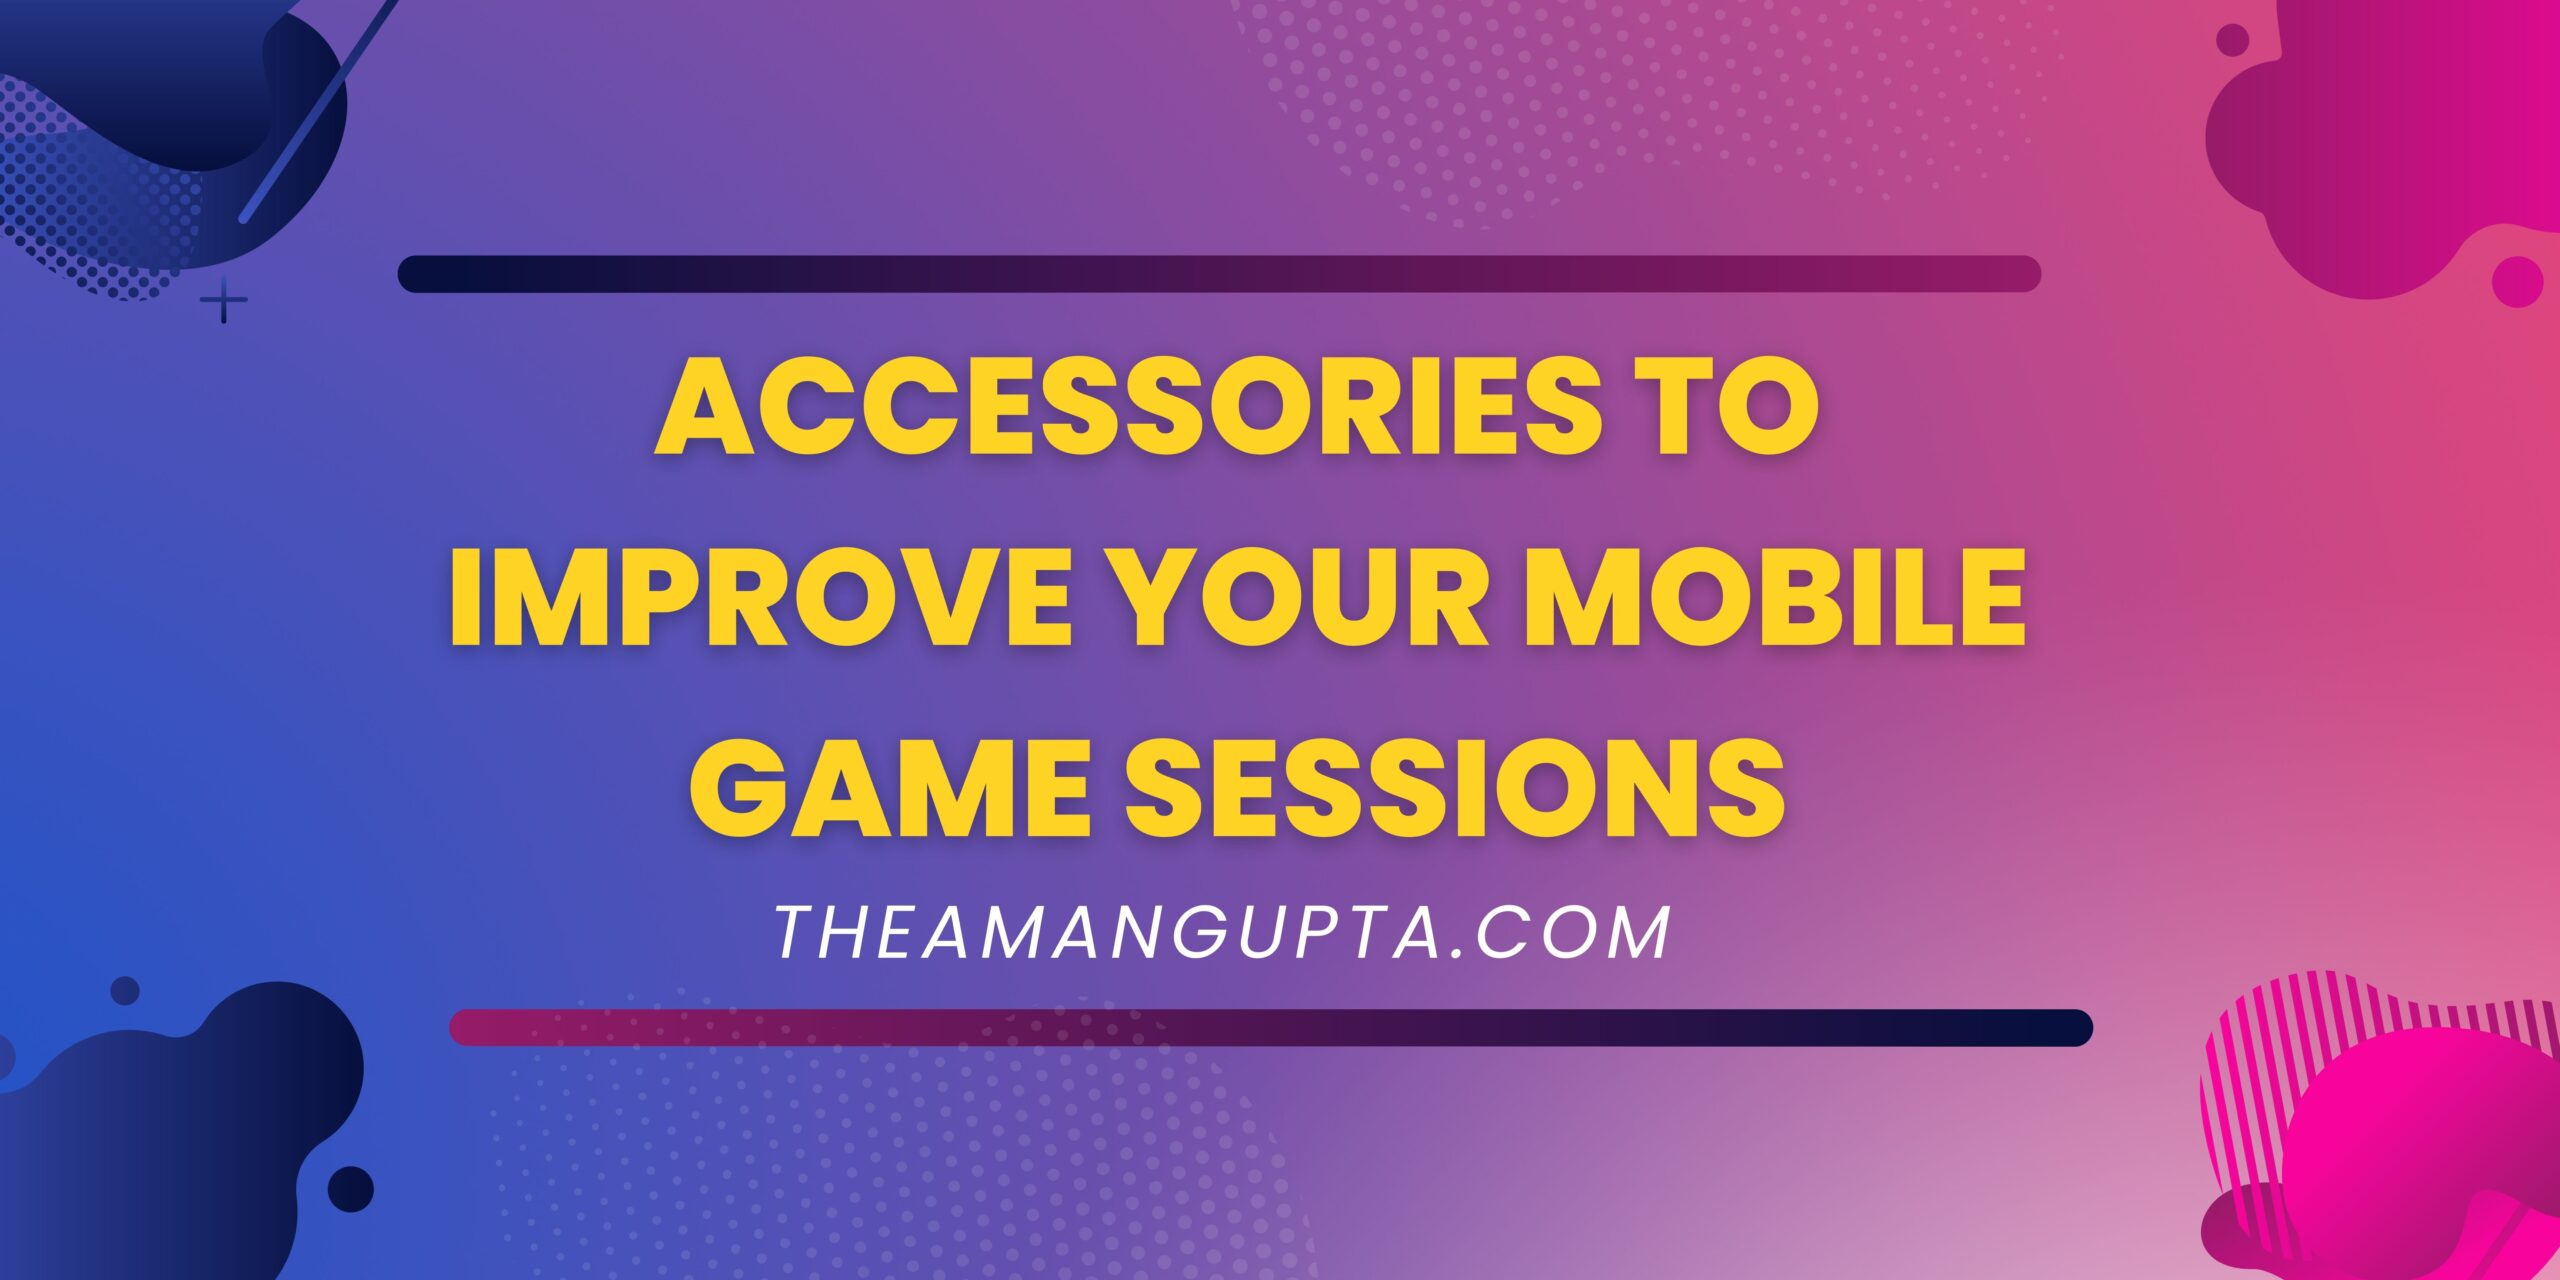 Accessories to Improve Your Mobile Gaming Sessions|Mobile Gaming|Theamangupta|Theamangupta